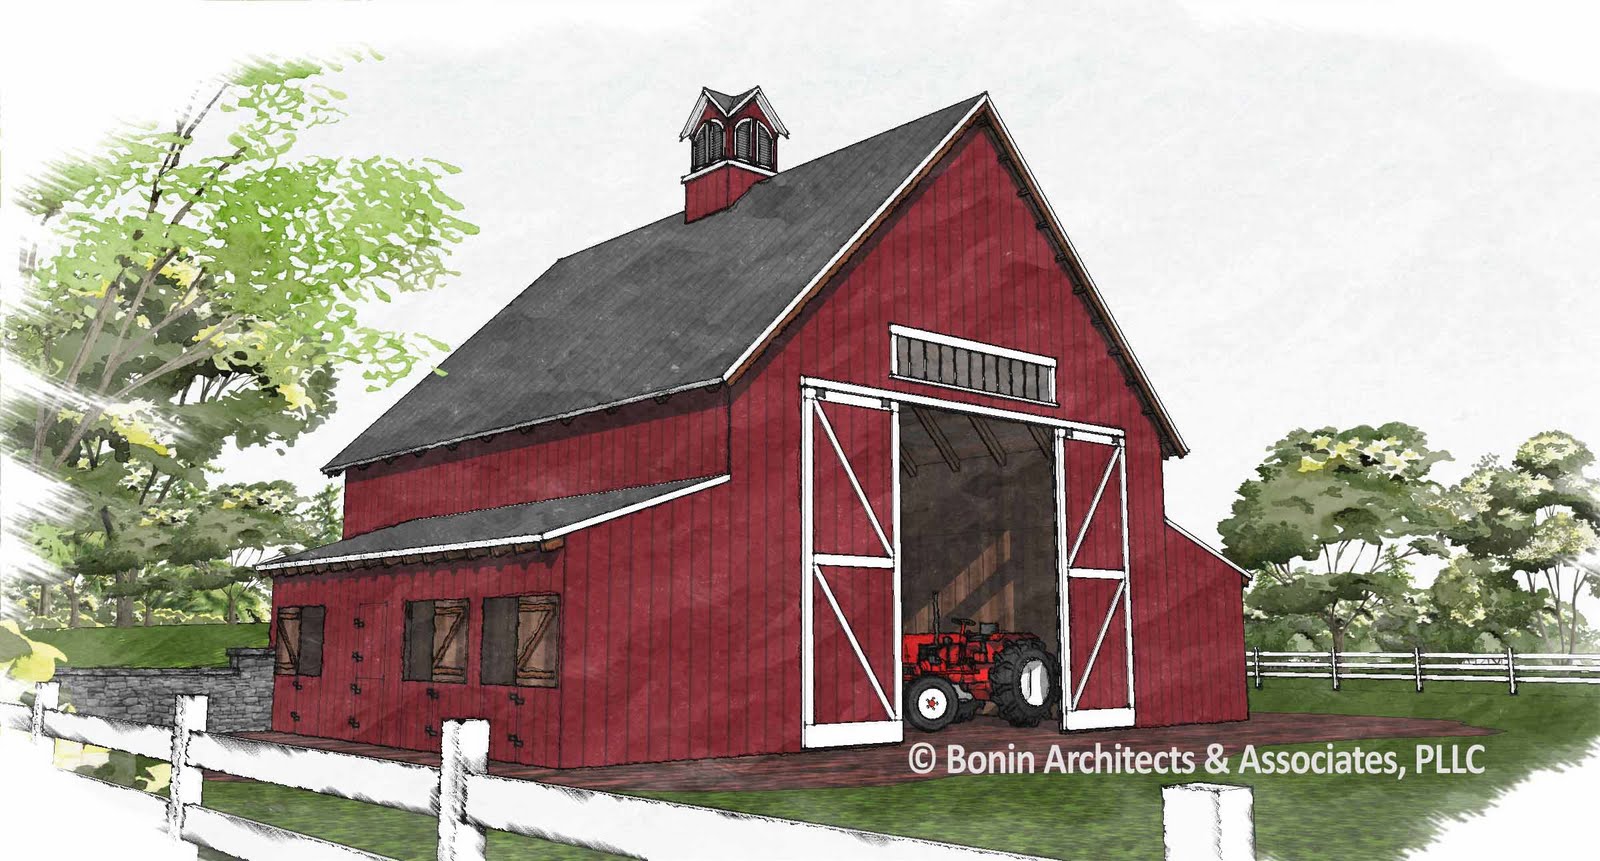 Here is the preliminary design for the barn, which will house a few 